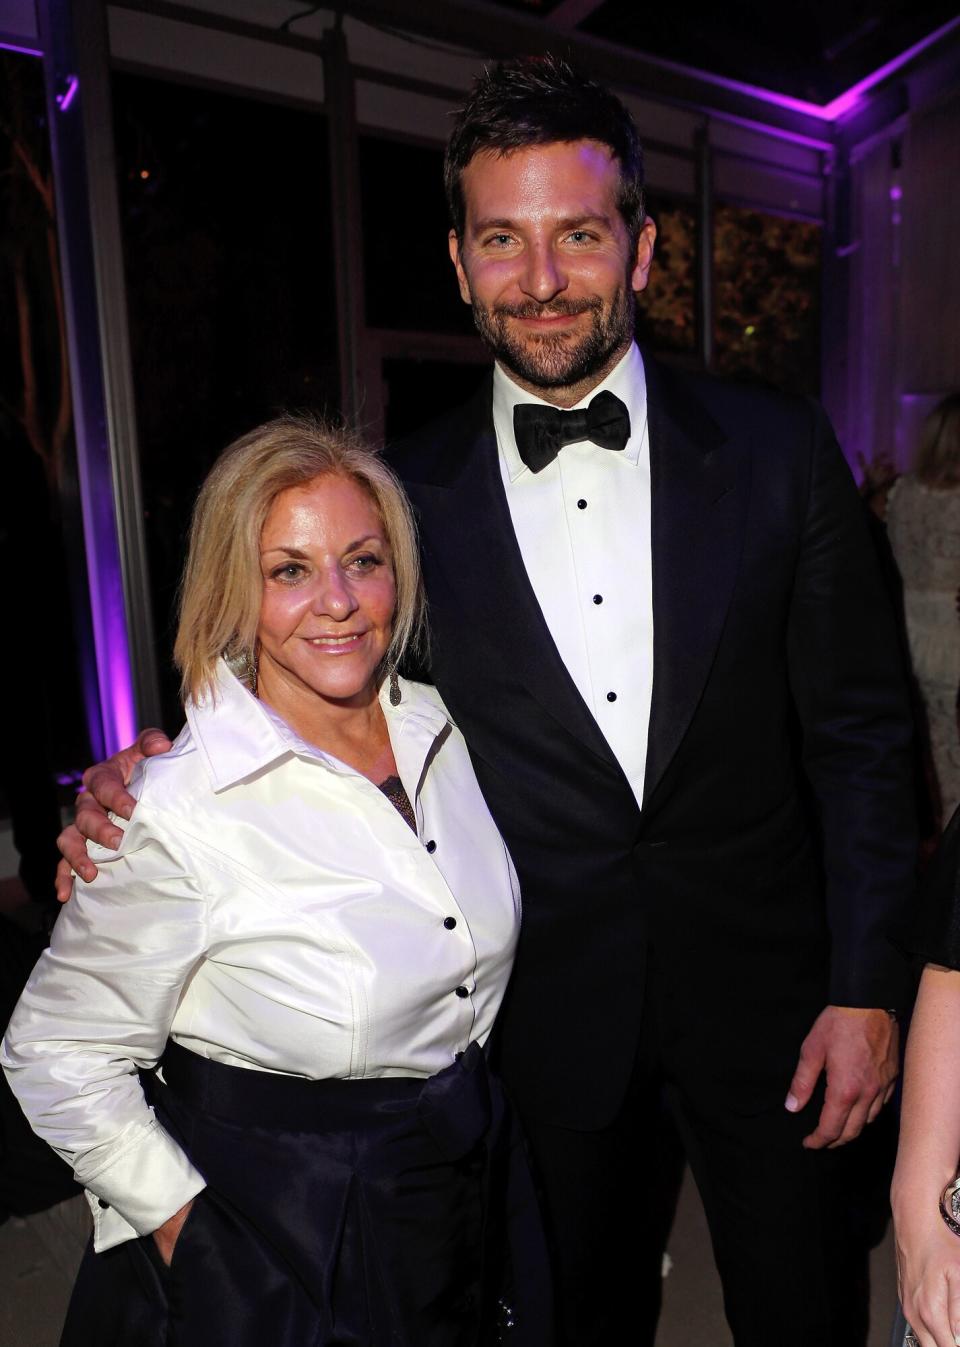 Actor Bradley Cooper (R) and Gloria Campano attend the 2014 Vanity Fair Oscar Party Hosted By Graydon Carter on March 2, 2014 in West Hollywood, California.